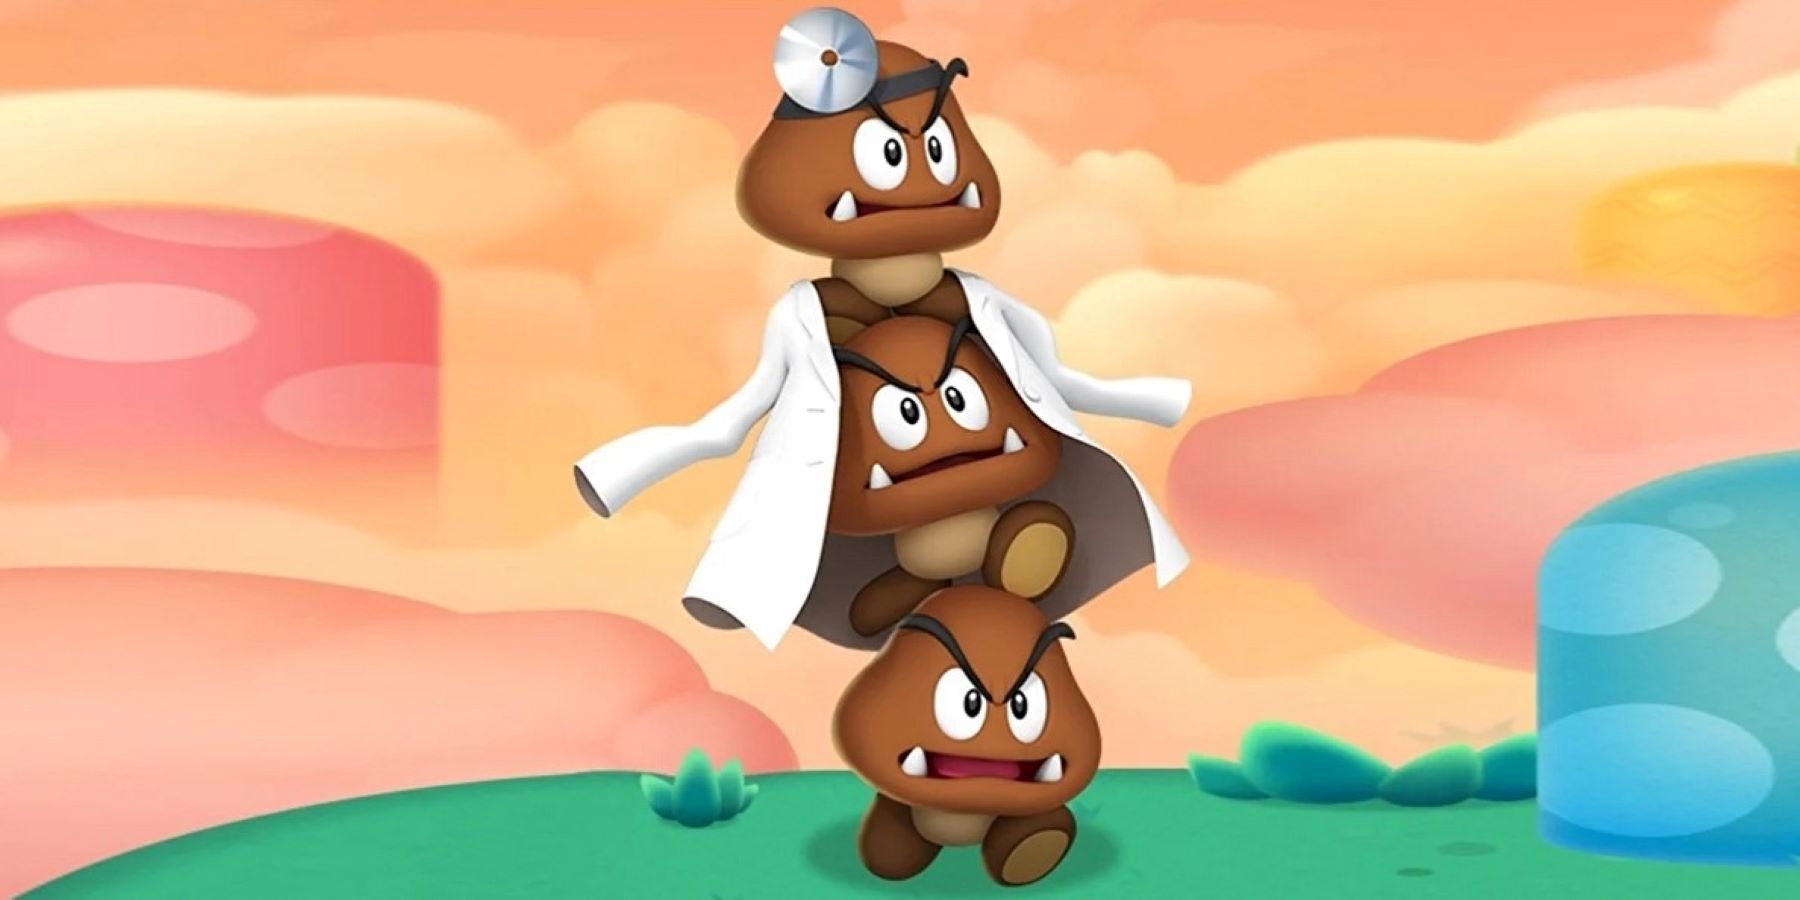 Dr. Goomba Tower from Dr. Mario World standing in front of a cloudy background